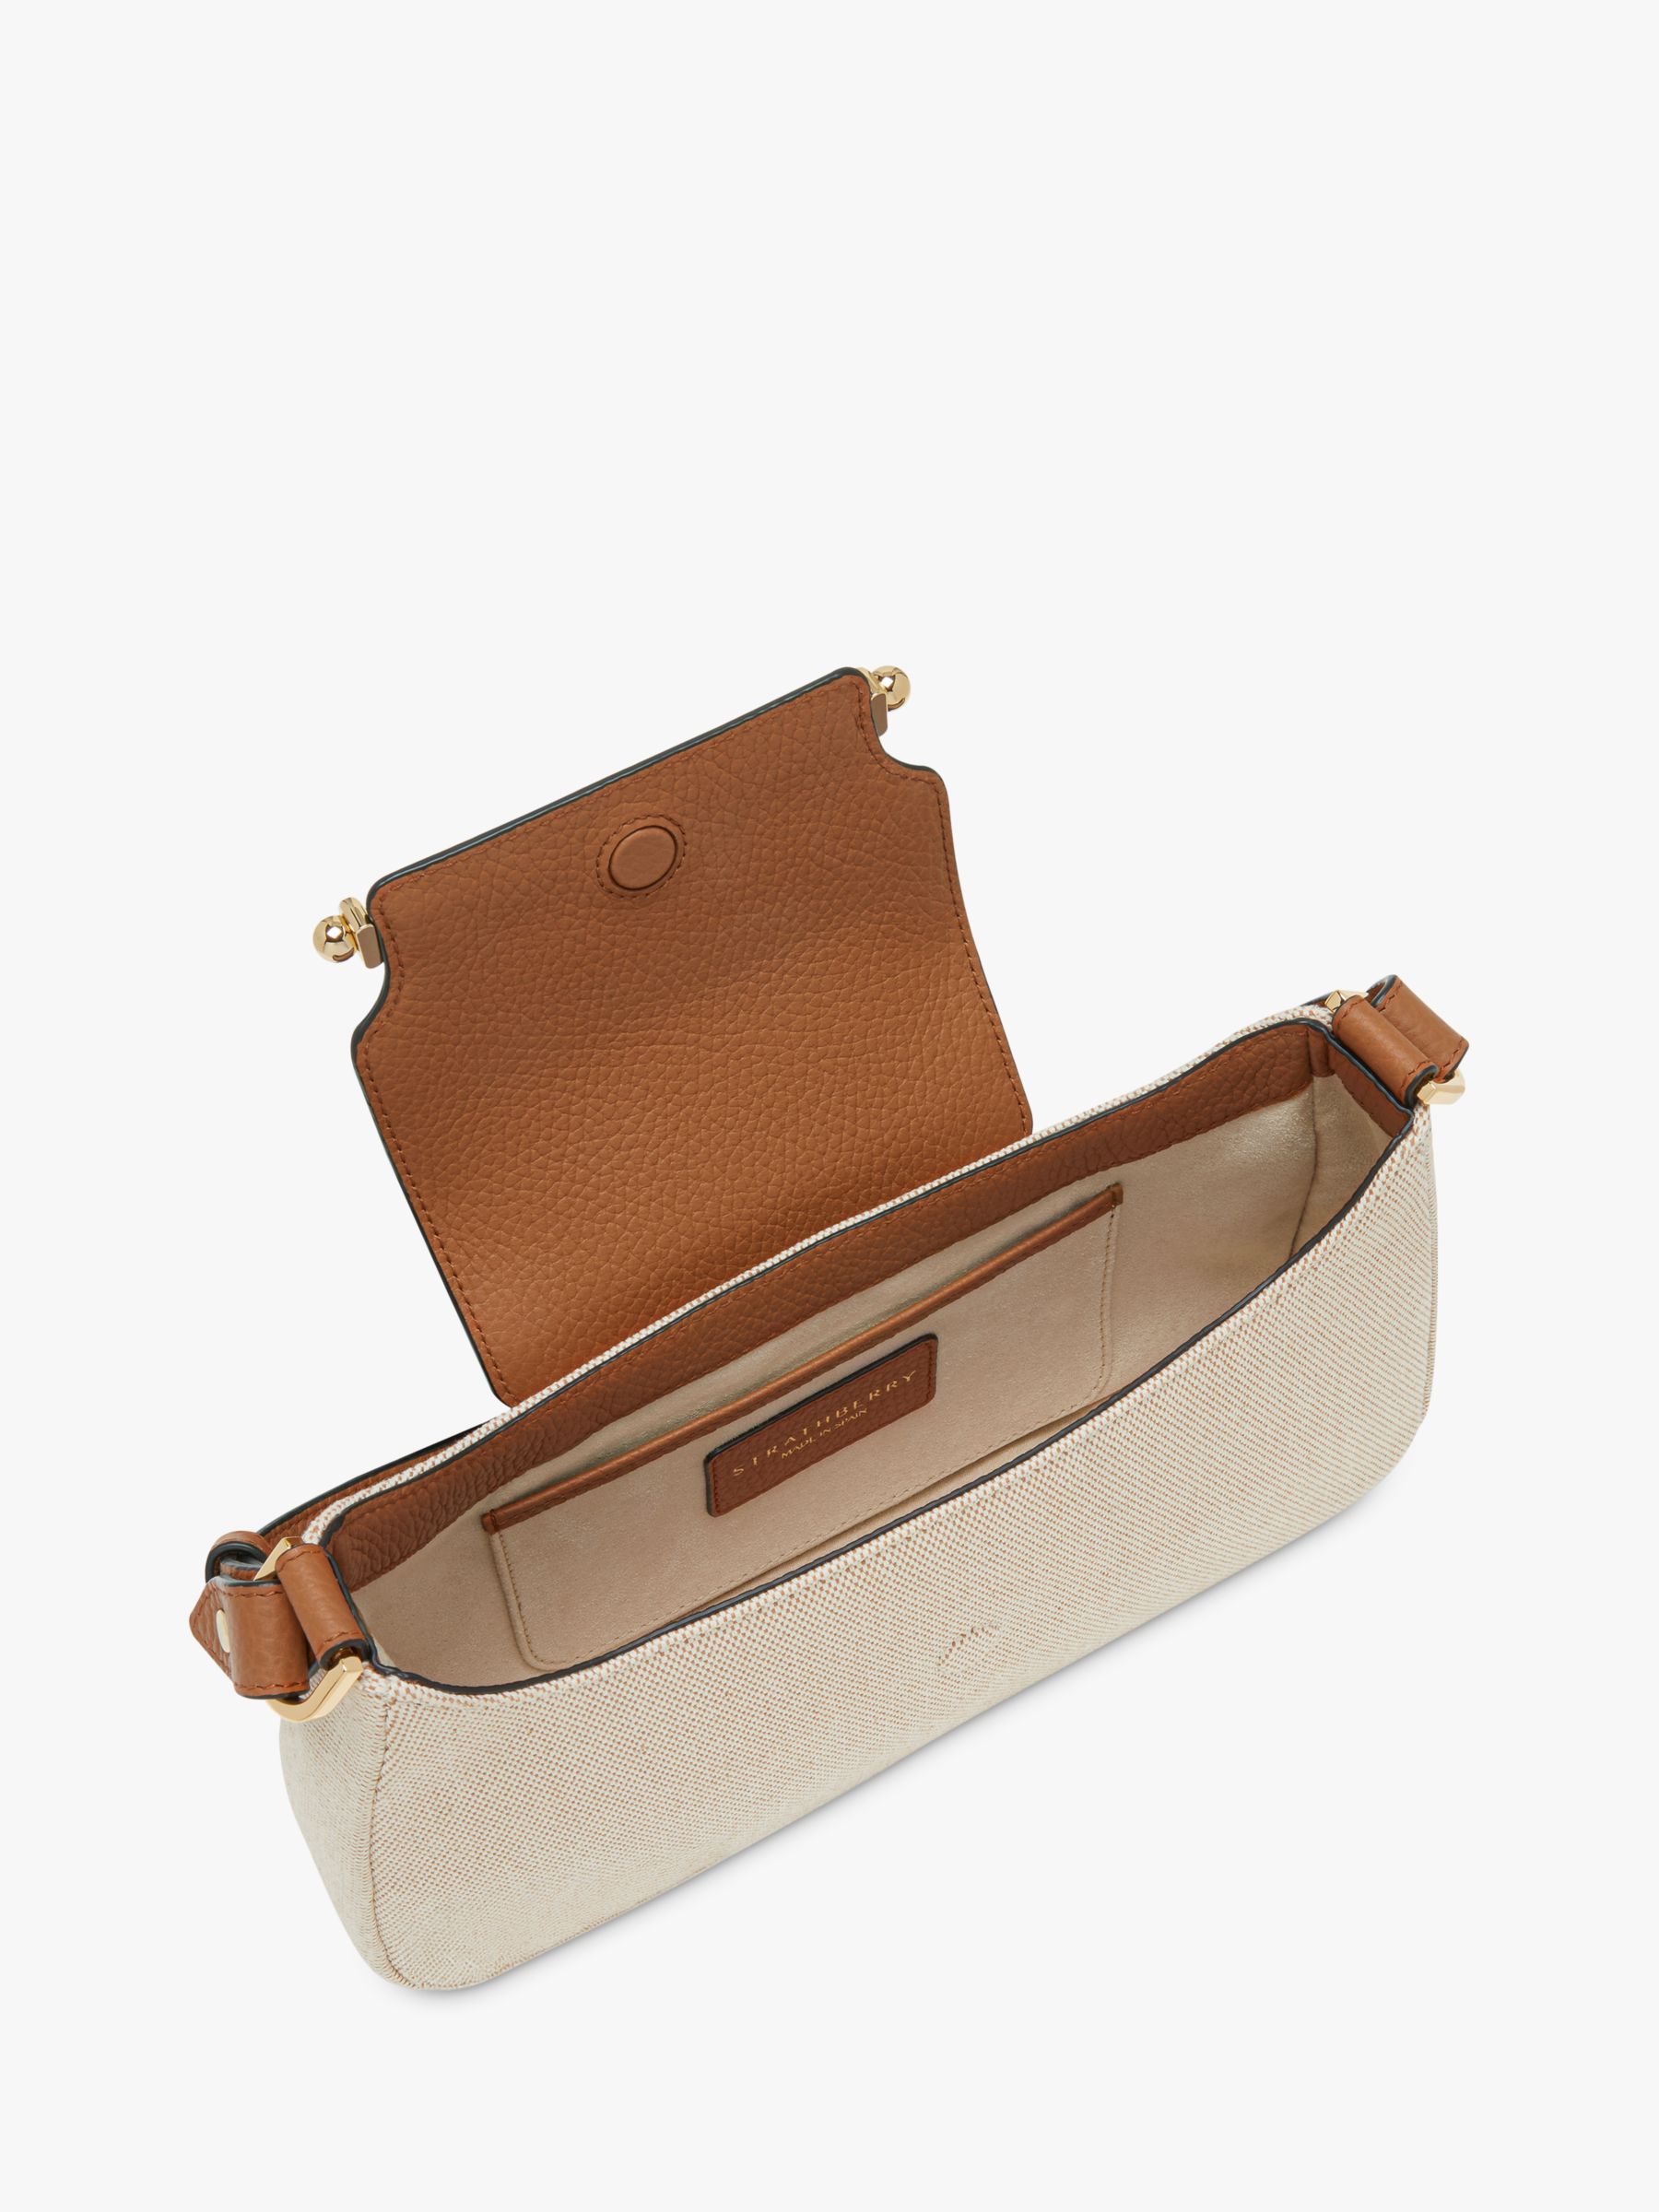 Buy Strathberry Multrees Omni Leather and Canvas Shoulder Bag, Ecru/Tan Online at johnlewis.com